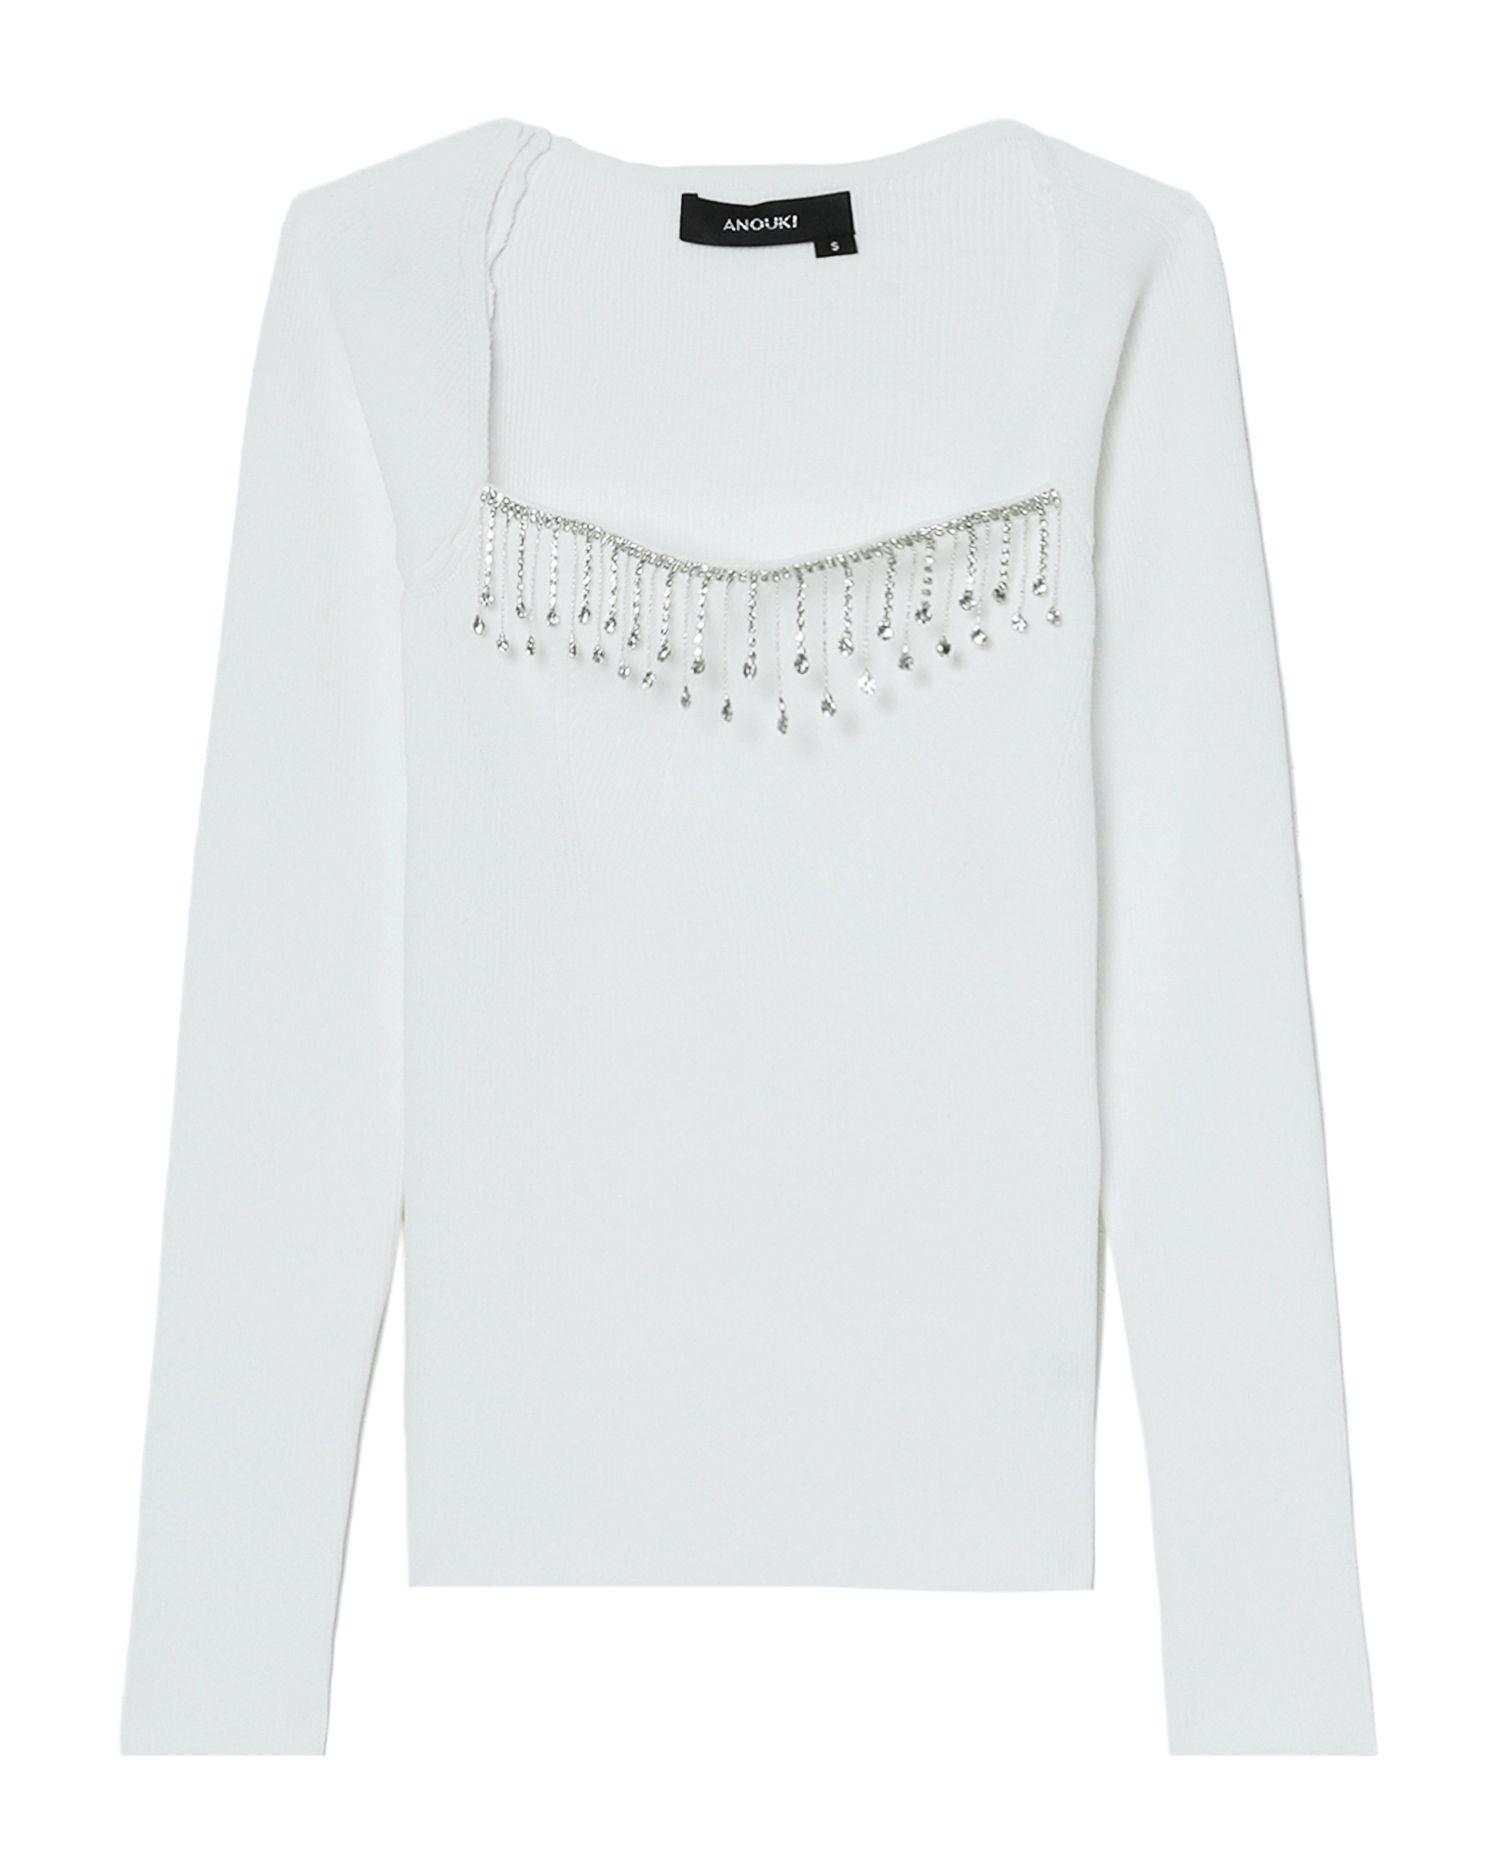 Crystal-embellished long-sleeve top by ANOUKI